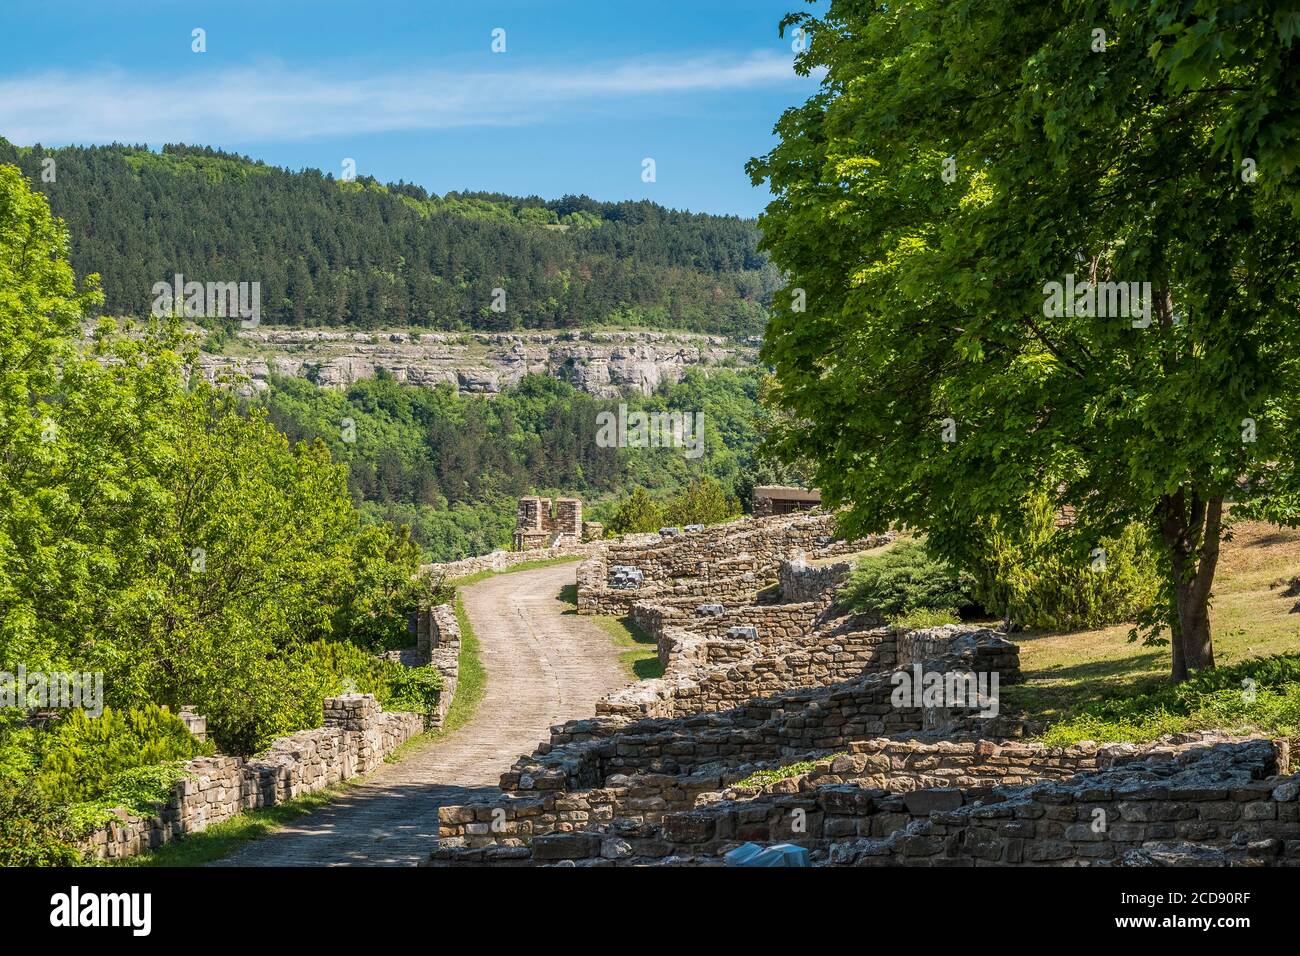 Bulgaria, Veliko Tarnovo, Ramparts of the Royal City, symbol of the glory of the Second Bulgarian Empire and the independence lost during the Ottoman invasions in Europe. Impregnable fortress, Tsarevets fell from the hands of a traitor. Stock Photo